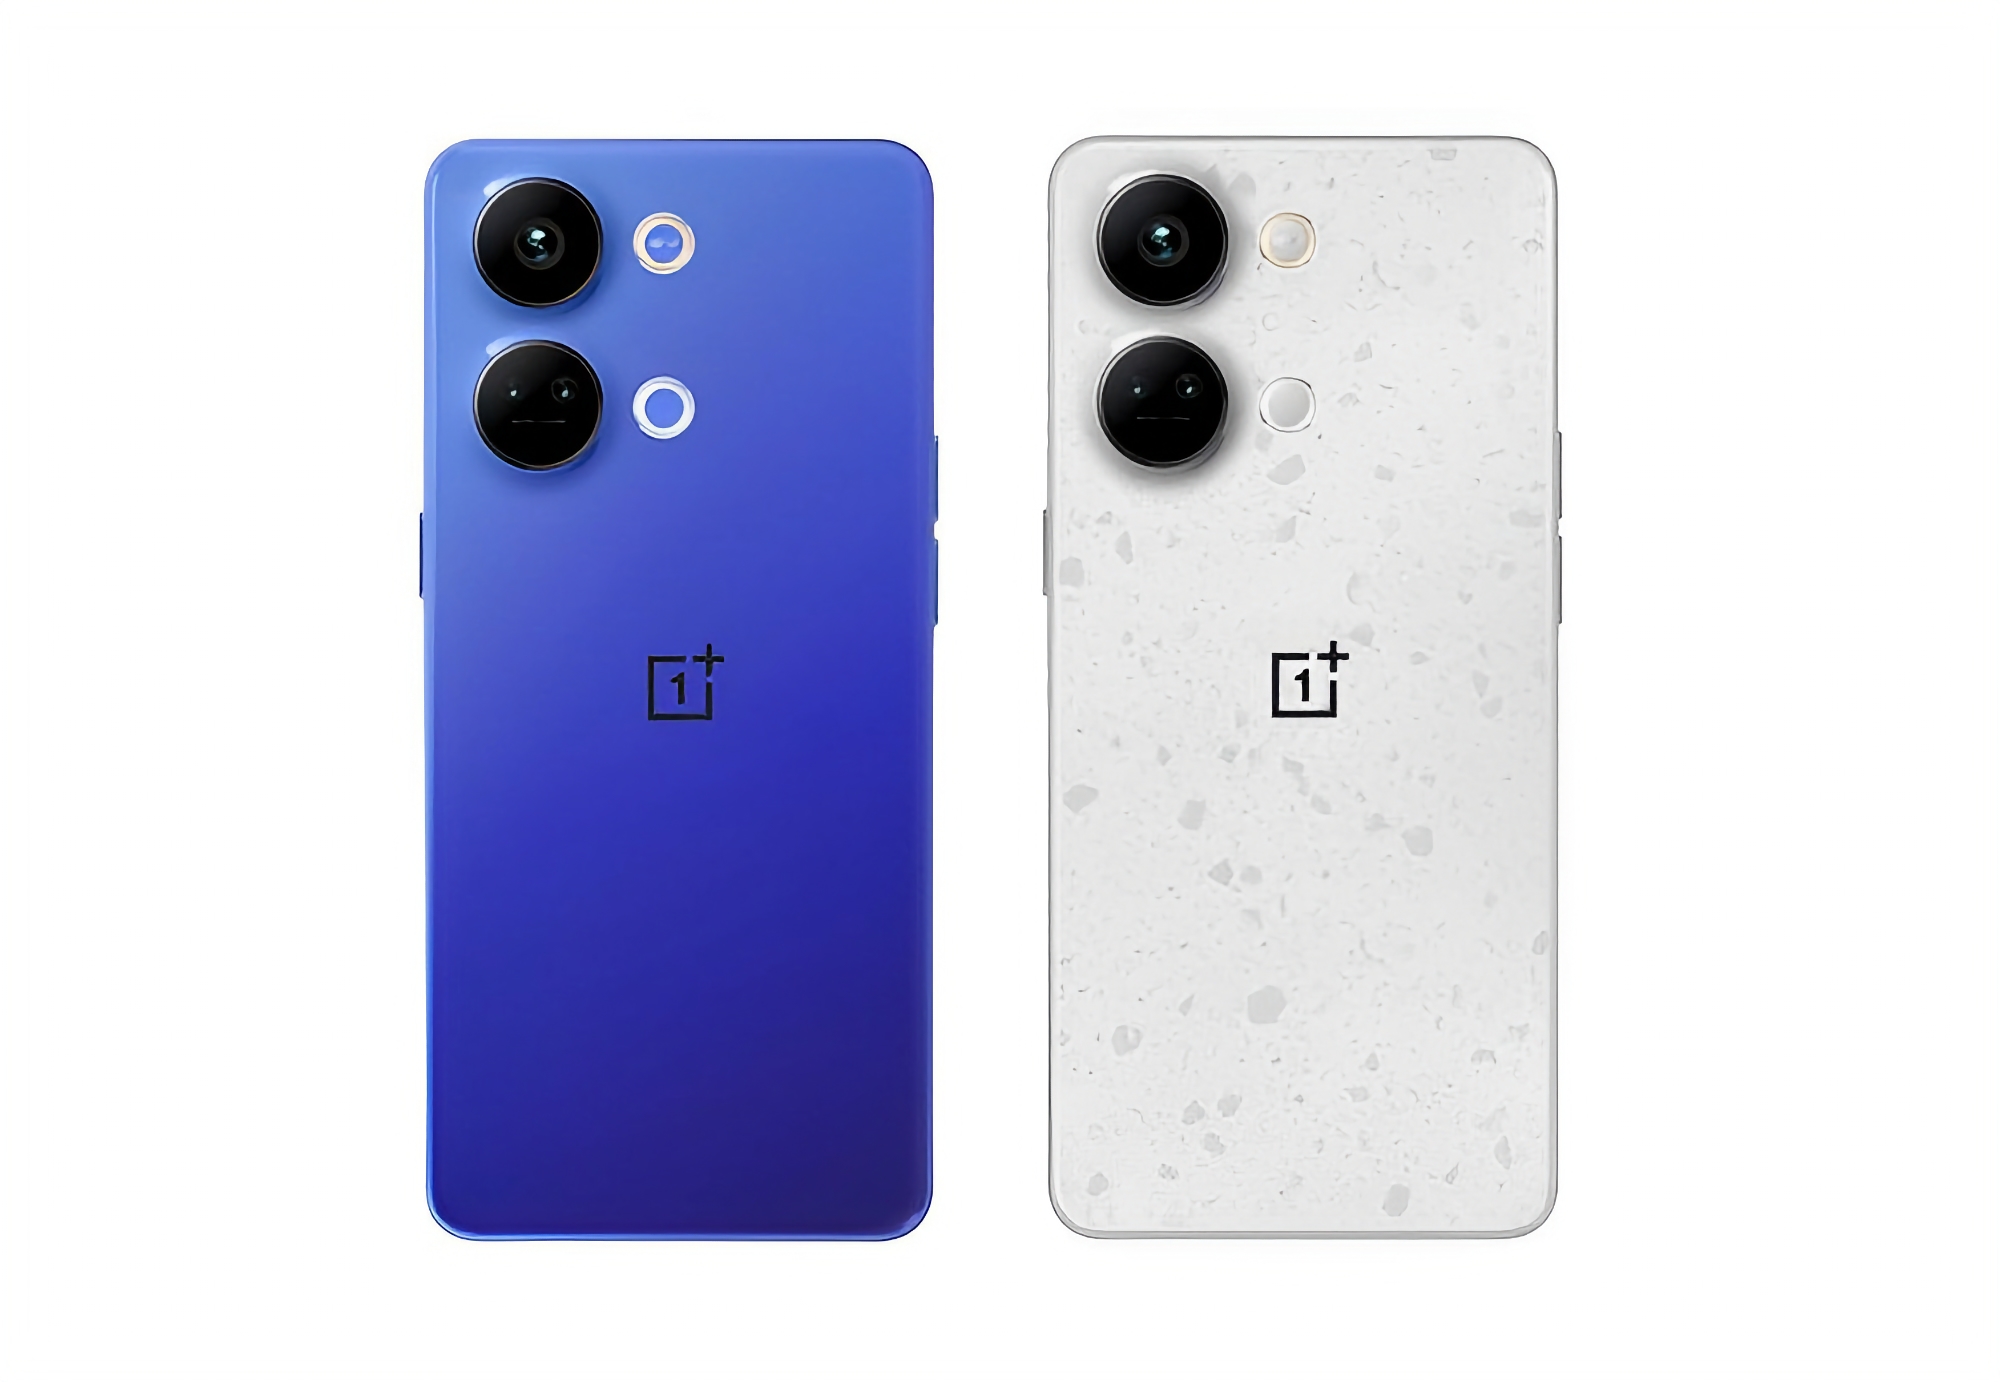 OnePlus had planned to release the Nord 3 in two more colours, but cancelled at the last minute